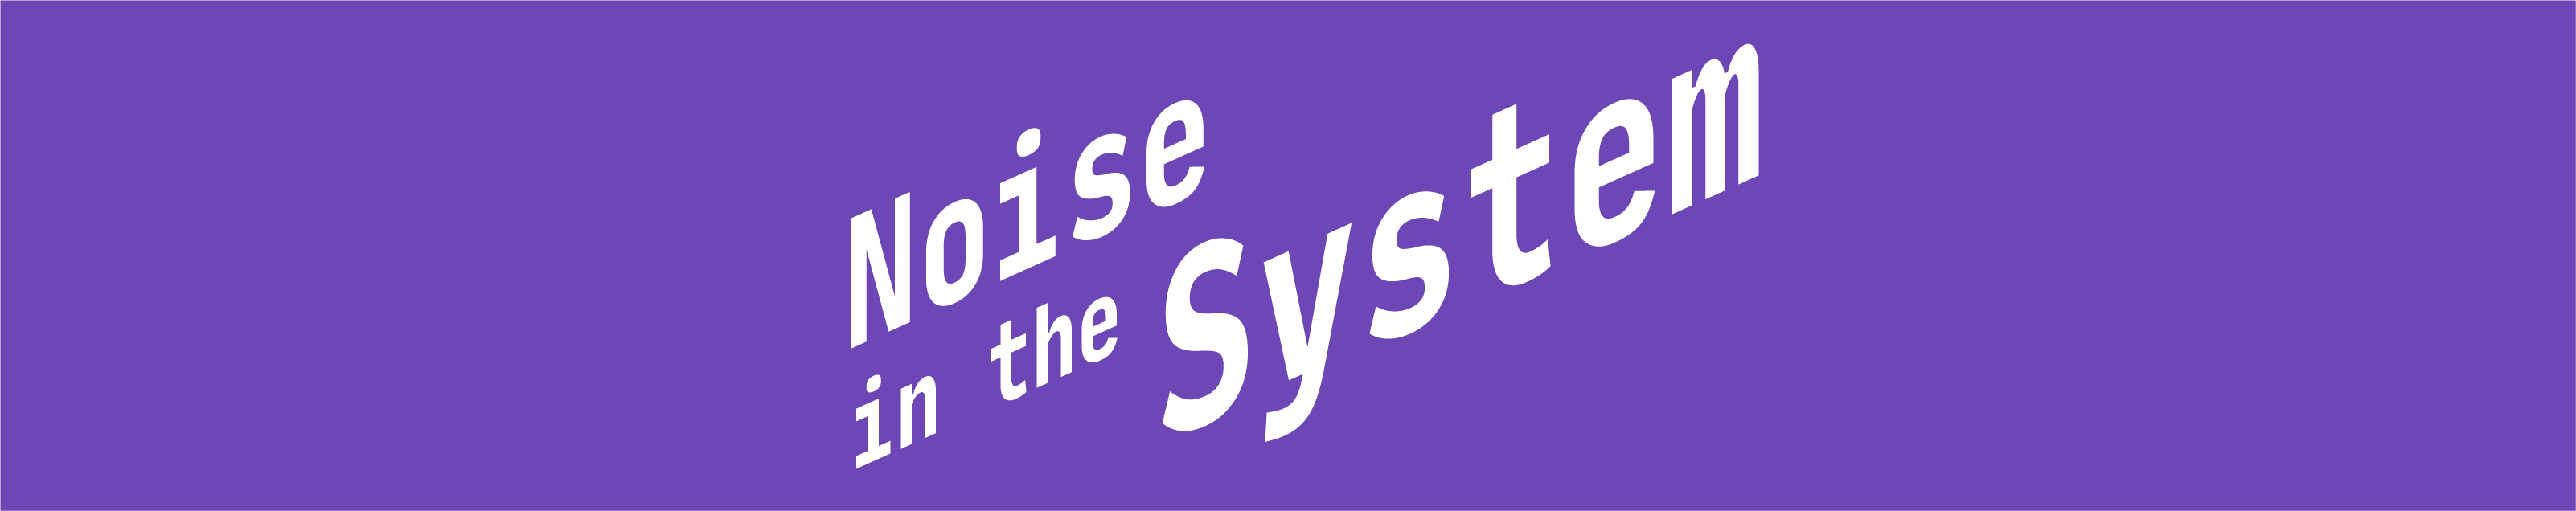 Noise in the System